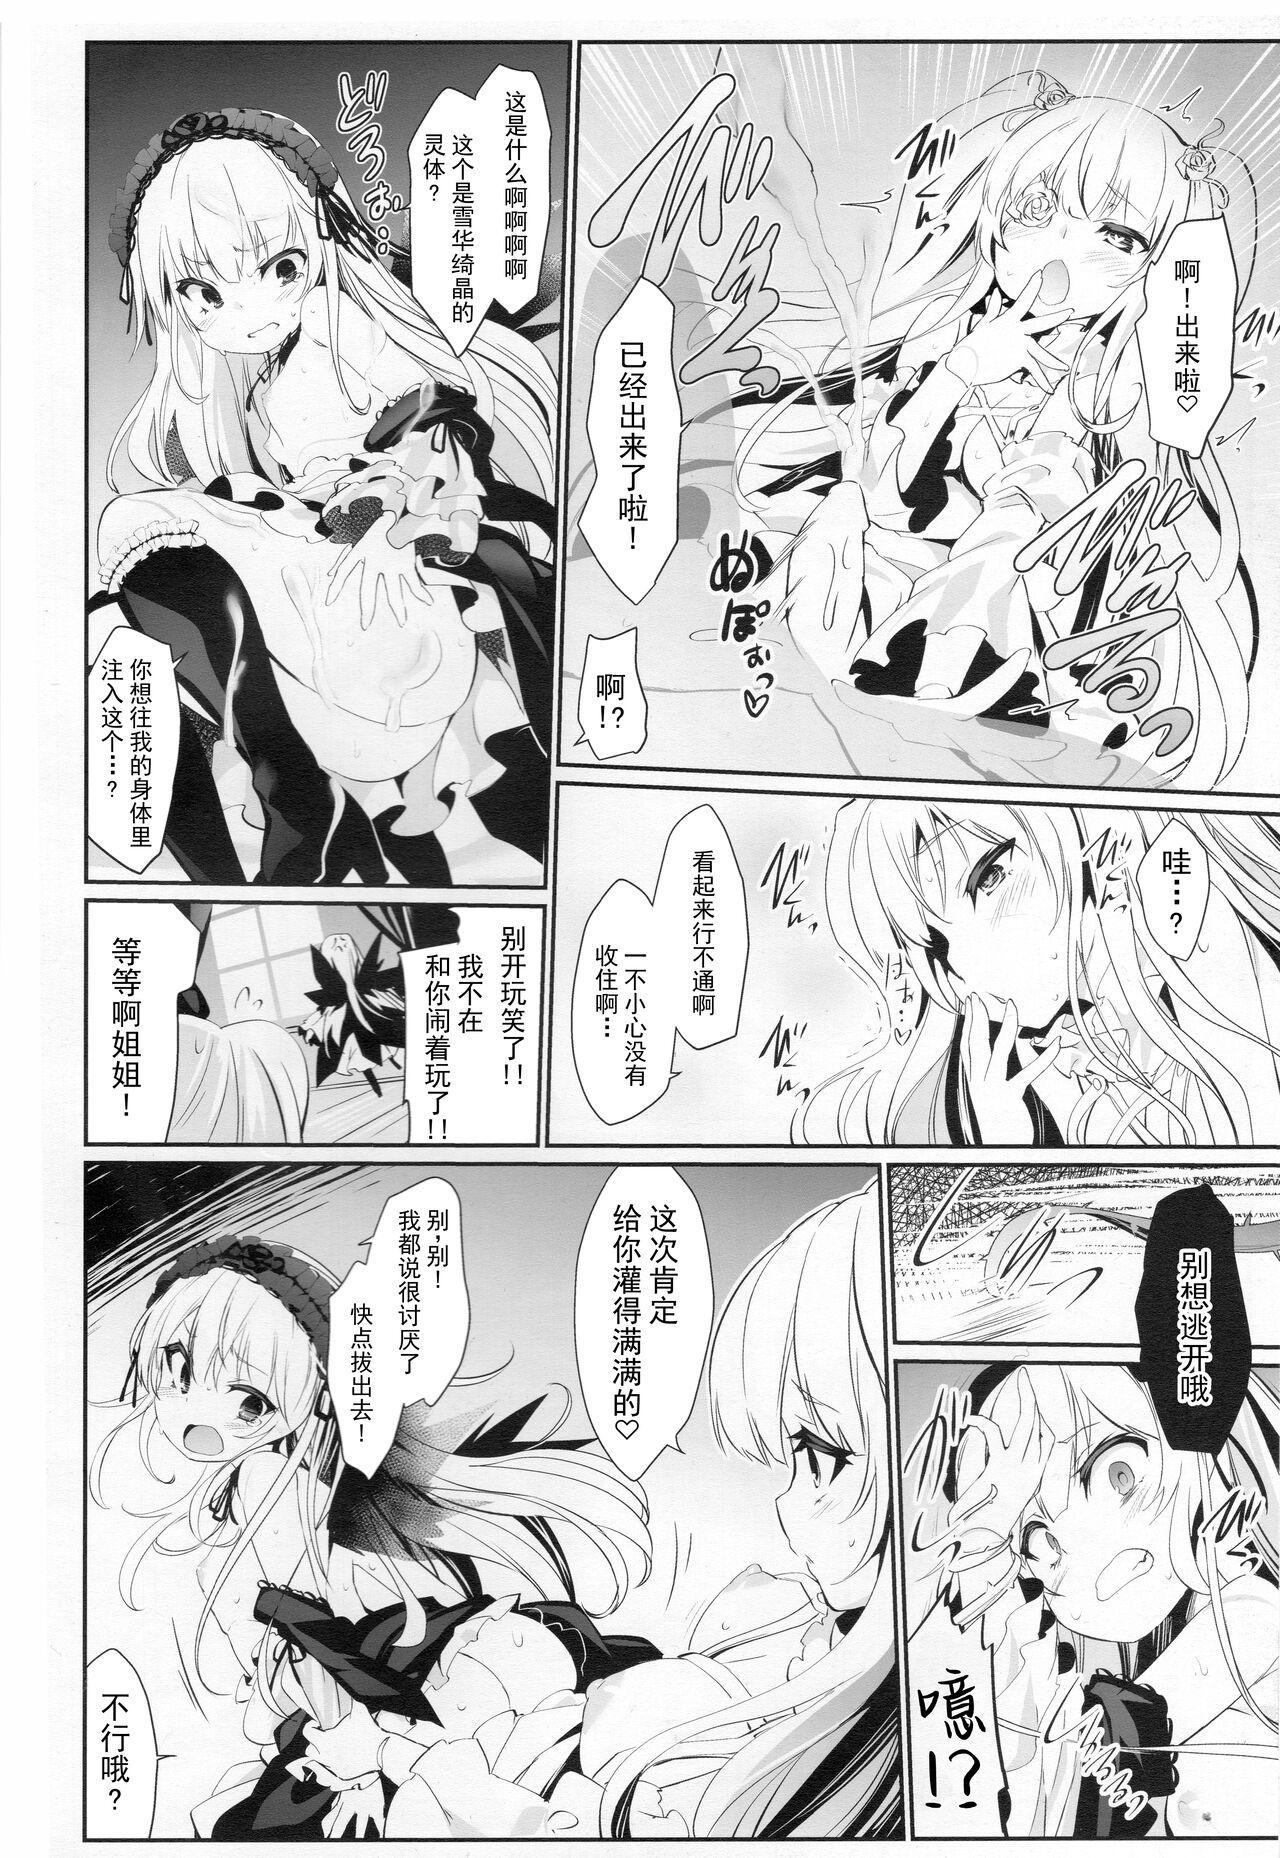 Gayemo Glamour Growth - Rozen maiden Shaven - Page 7